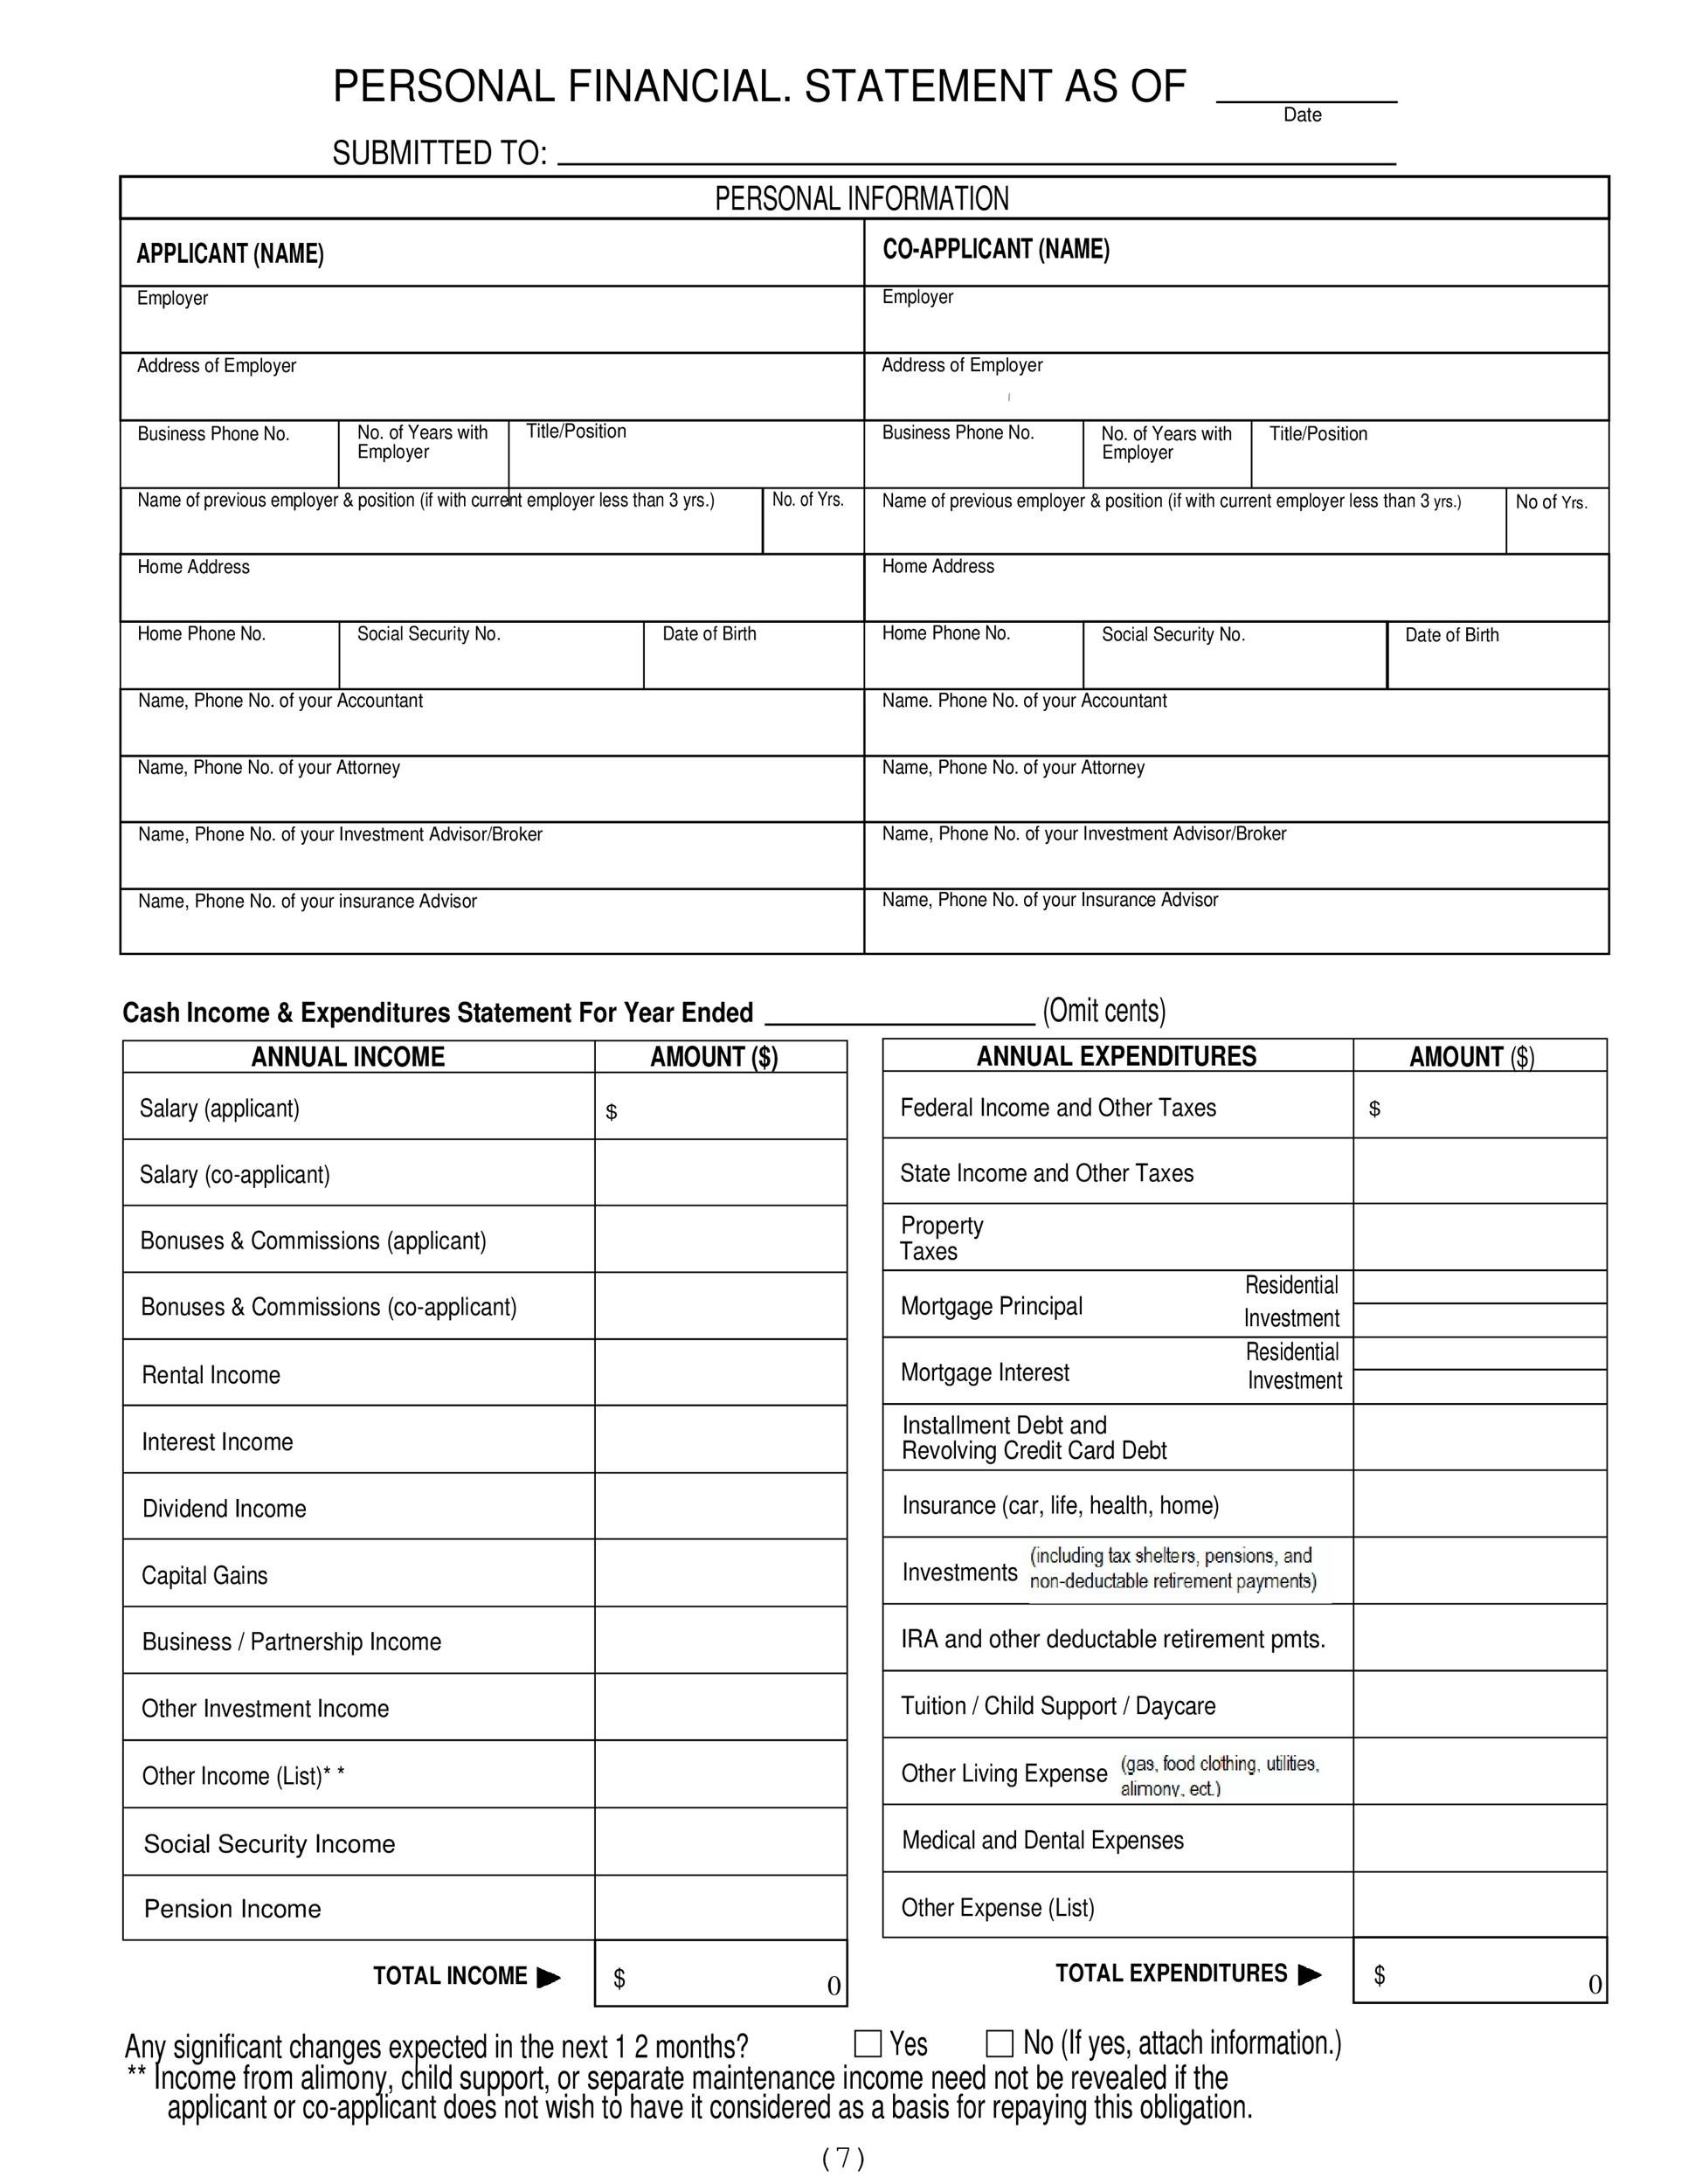 Free Personal Financial Statement Template 15